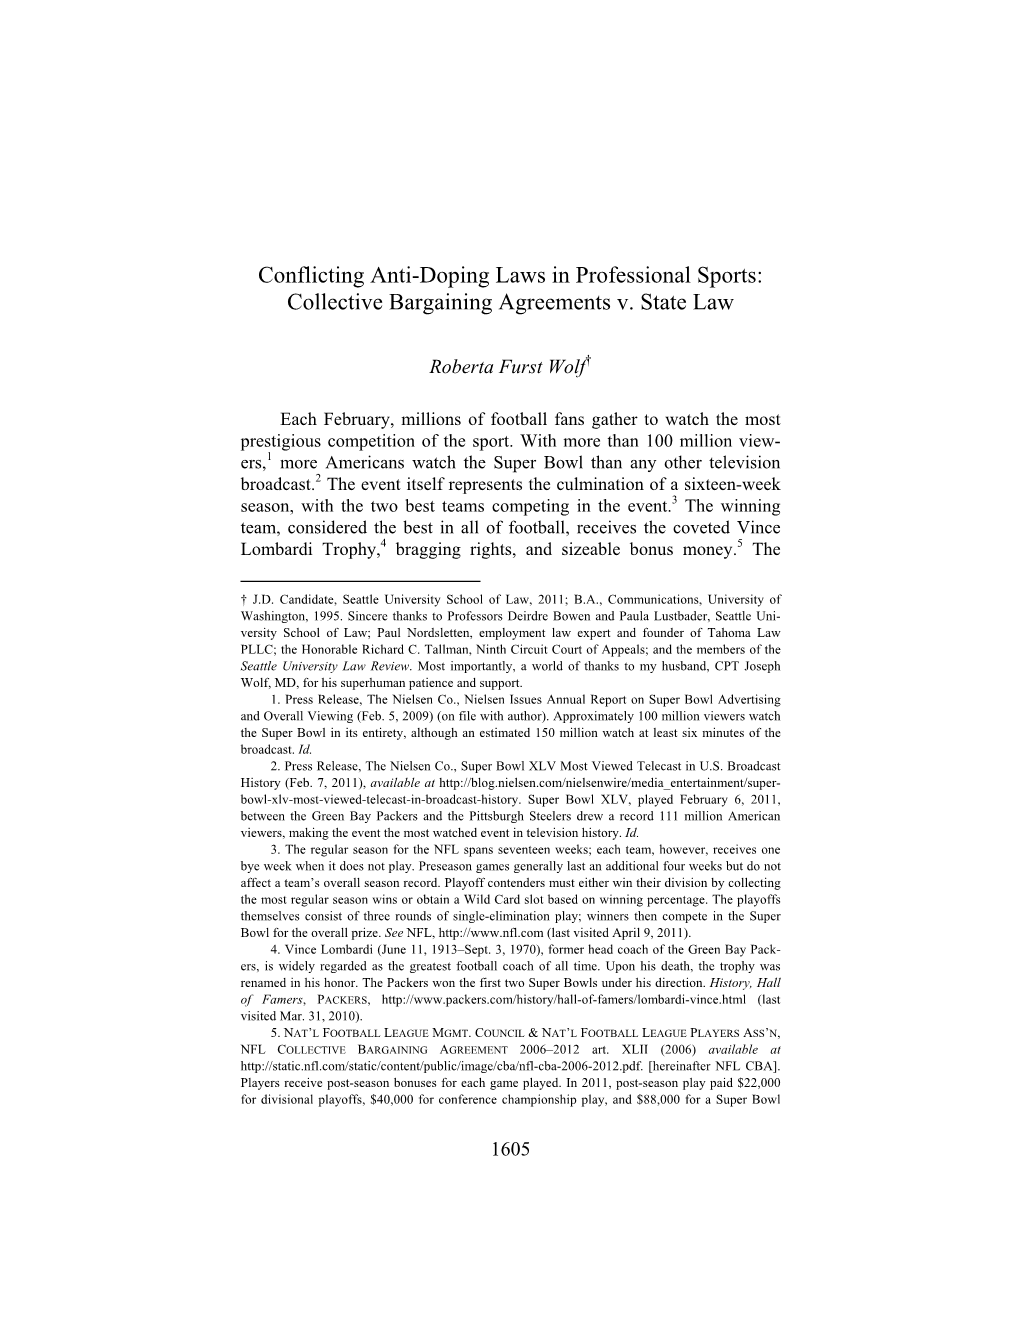 Conflicting Anti-Doping Laws in Professional Sports: Collective Bargaining Agreements V